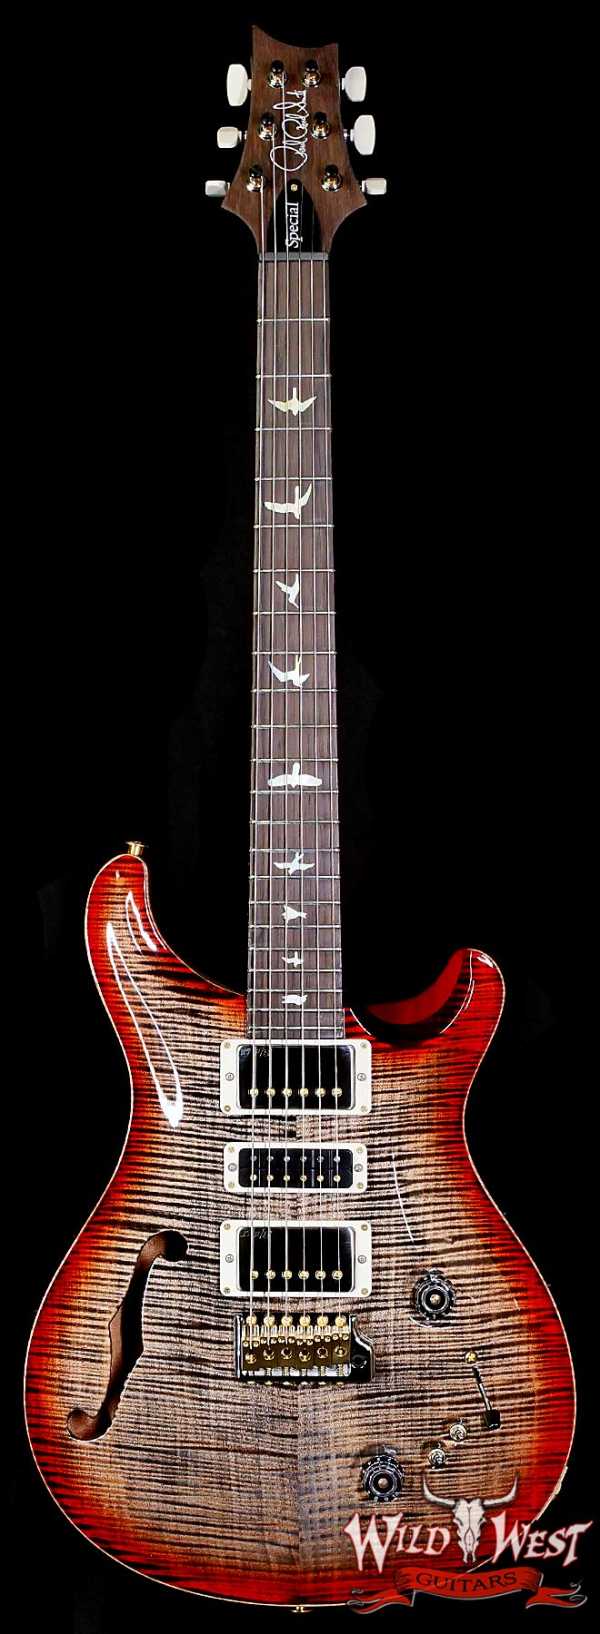 Paul Reed Smith PRS Wood Library 10 Top Special 22 Semi-Hollow Flame Maple Neck Brazilian Rosewood Fingerboard Chaocoal Cherry Burst 6.95 LBS (US Only / No International Shipping)